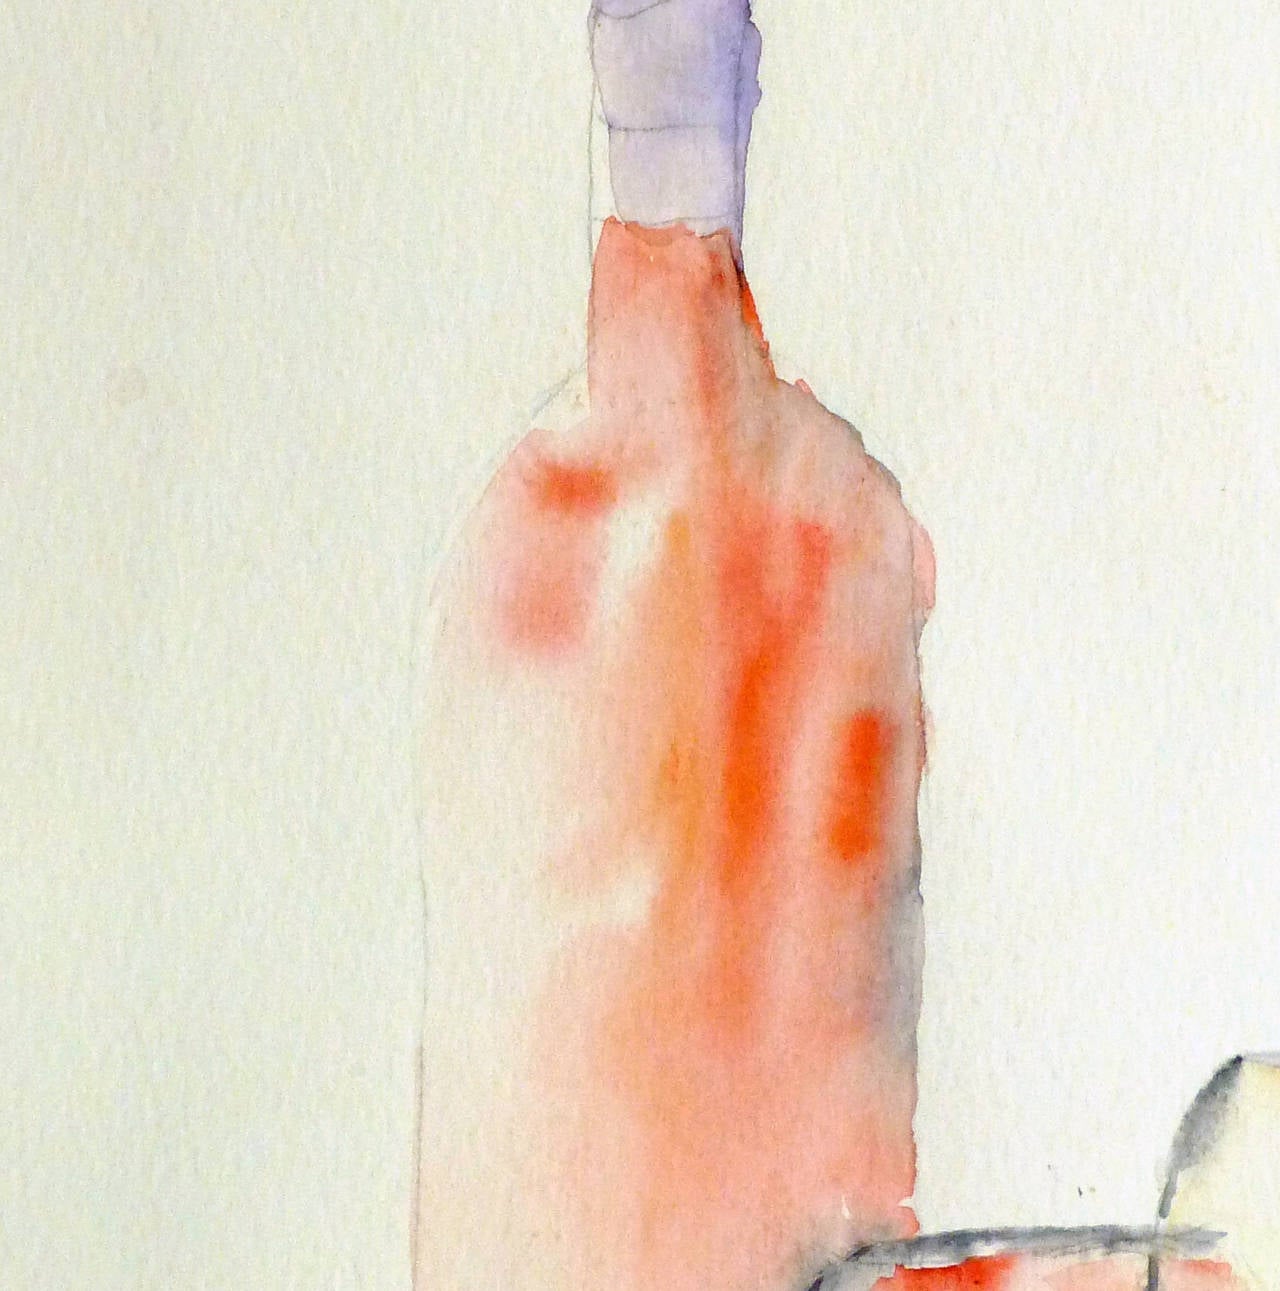 Delightful watercolor still life of a bottle of wine coupled with two glasses on a serving tray by artist Monique Tachdjian, 2009.

Original one-of-a-kind artwork on paper displayed on a white mat with a gold border. Mat fits a standard-size